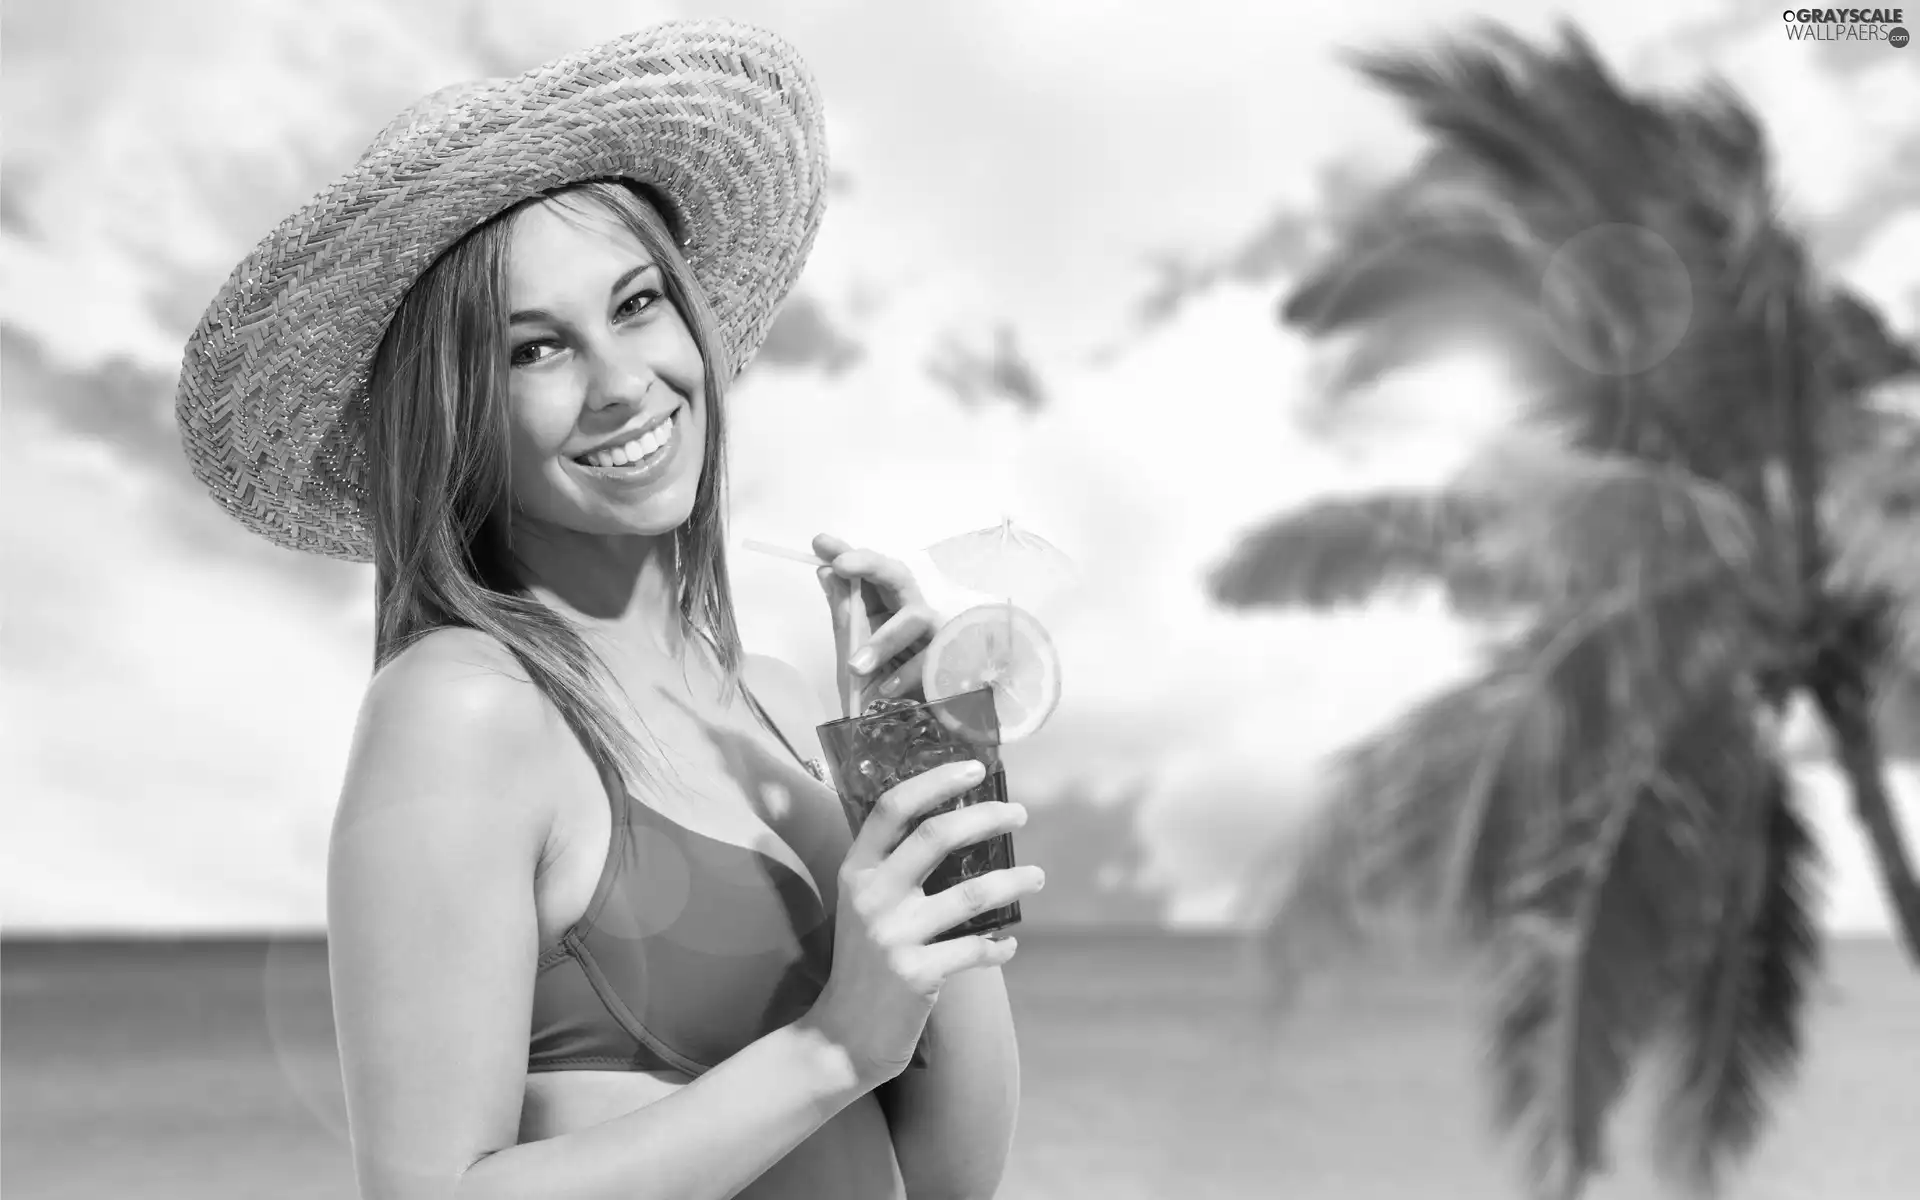 Beaches, smiling, cocktail, Hat, Palms, Women